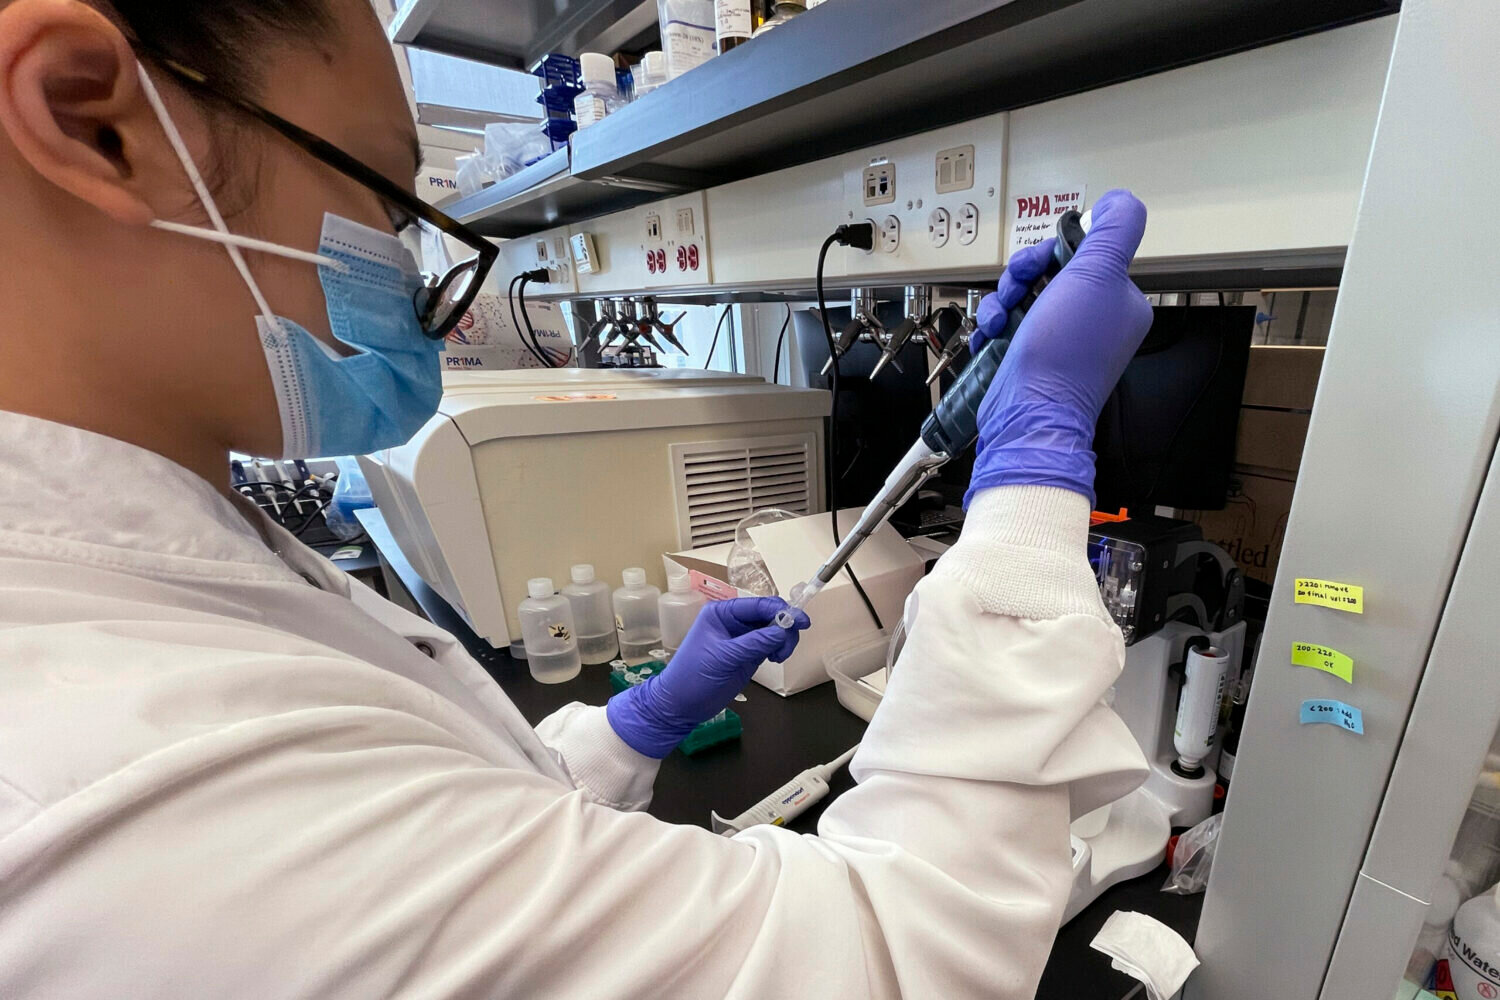 Emily Lu, a student in the environment science graduate program at Ohio State, tries to extract ribonucleic acid (RNA) from wastewater samples to test for fragments of the coronavirus, March 23, 2022 at a school lab in Columbus, Ohio.